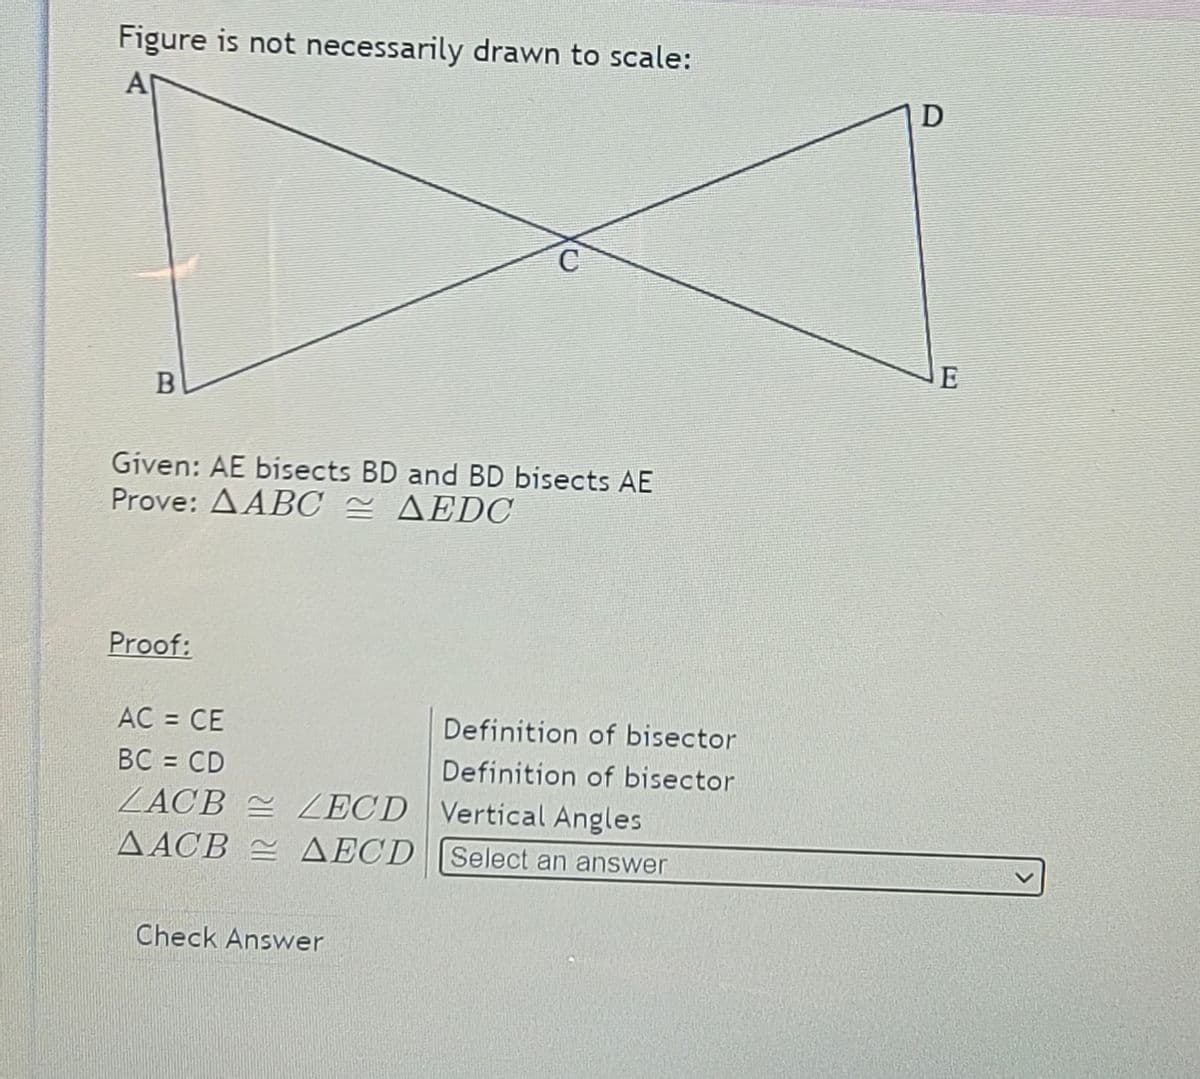 Figure is not necessarily drawn to scale:
A
D
C
Given: AE bisects BD and BD bisects AE
Prove: AABC = AEDOC
Proof:
AC = CE
Definition of bisector
BC = CD
ZACB = ZECD Vertical Angles
ΔΑCB ΔΕCD
Definition of bisector
Select an answer
Check Answer
